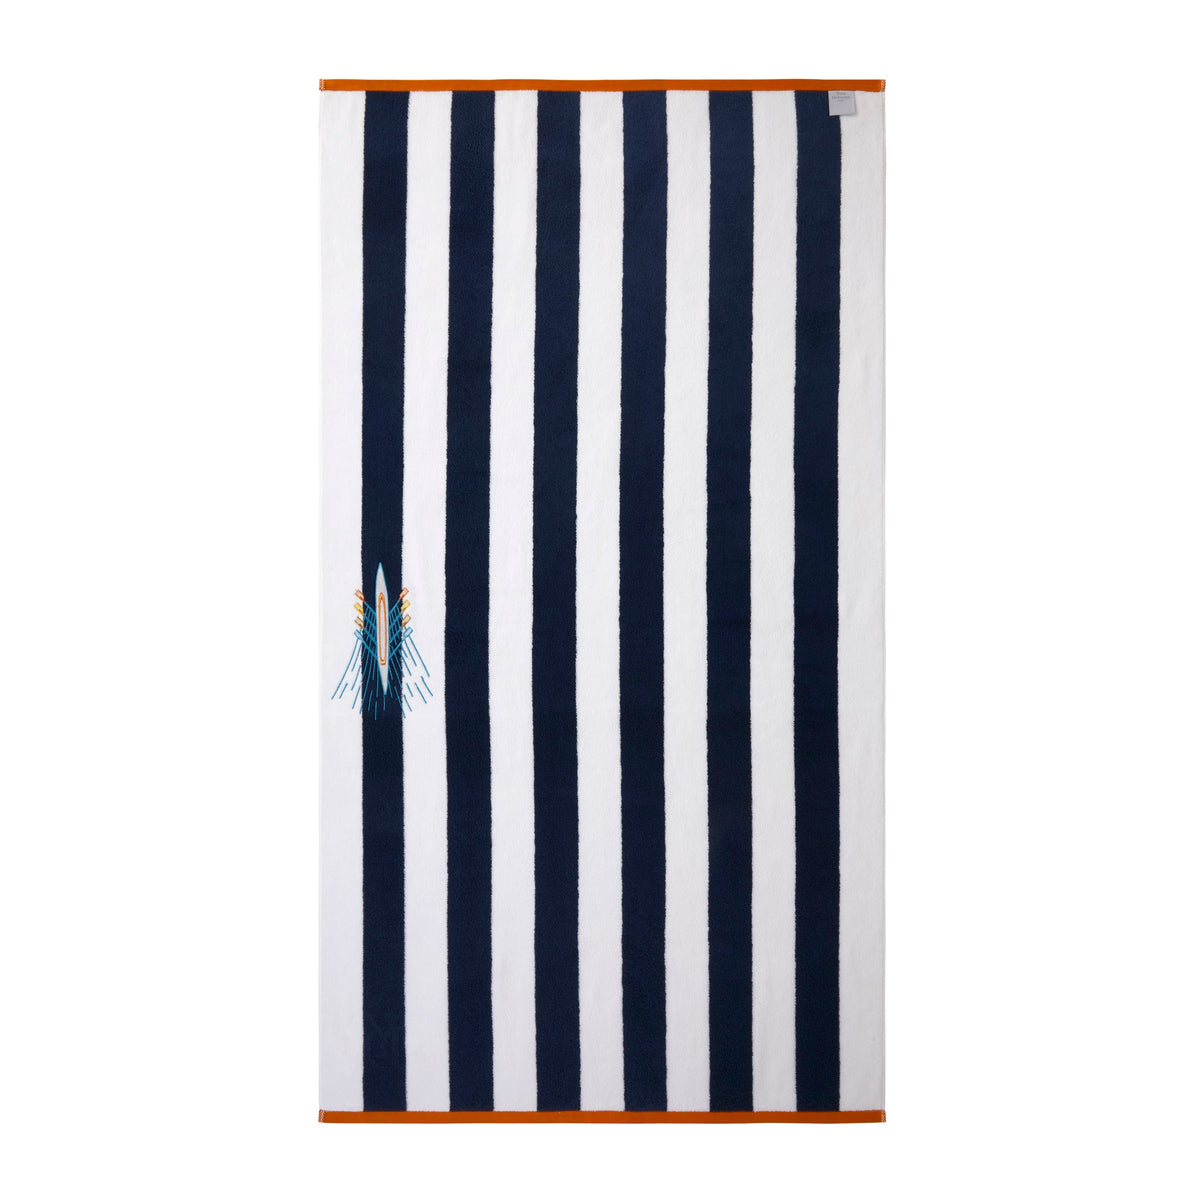 Back View of Yves Delorme Tribord Beach Towel